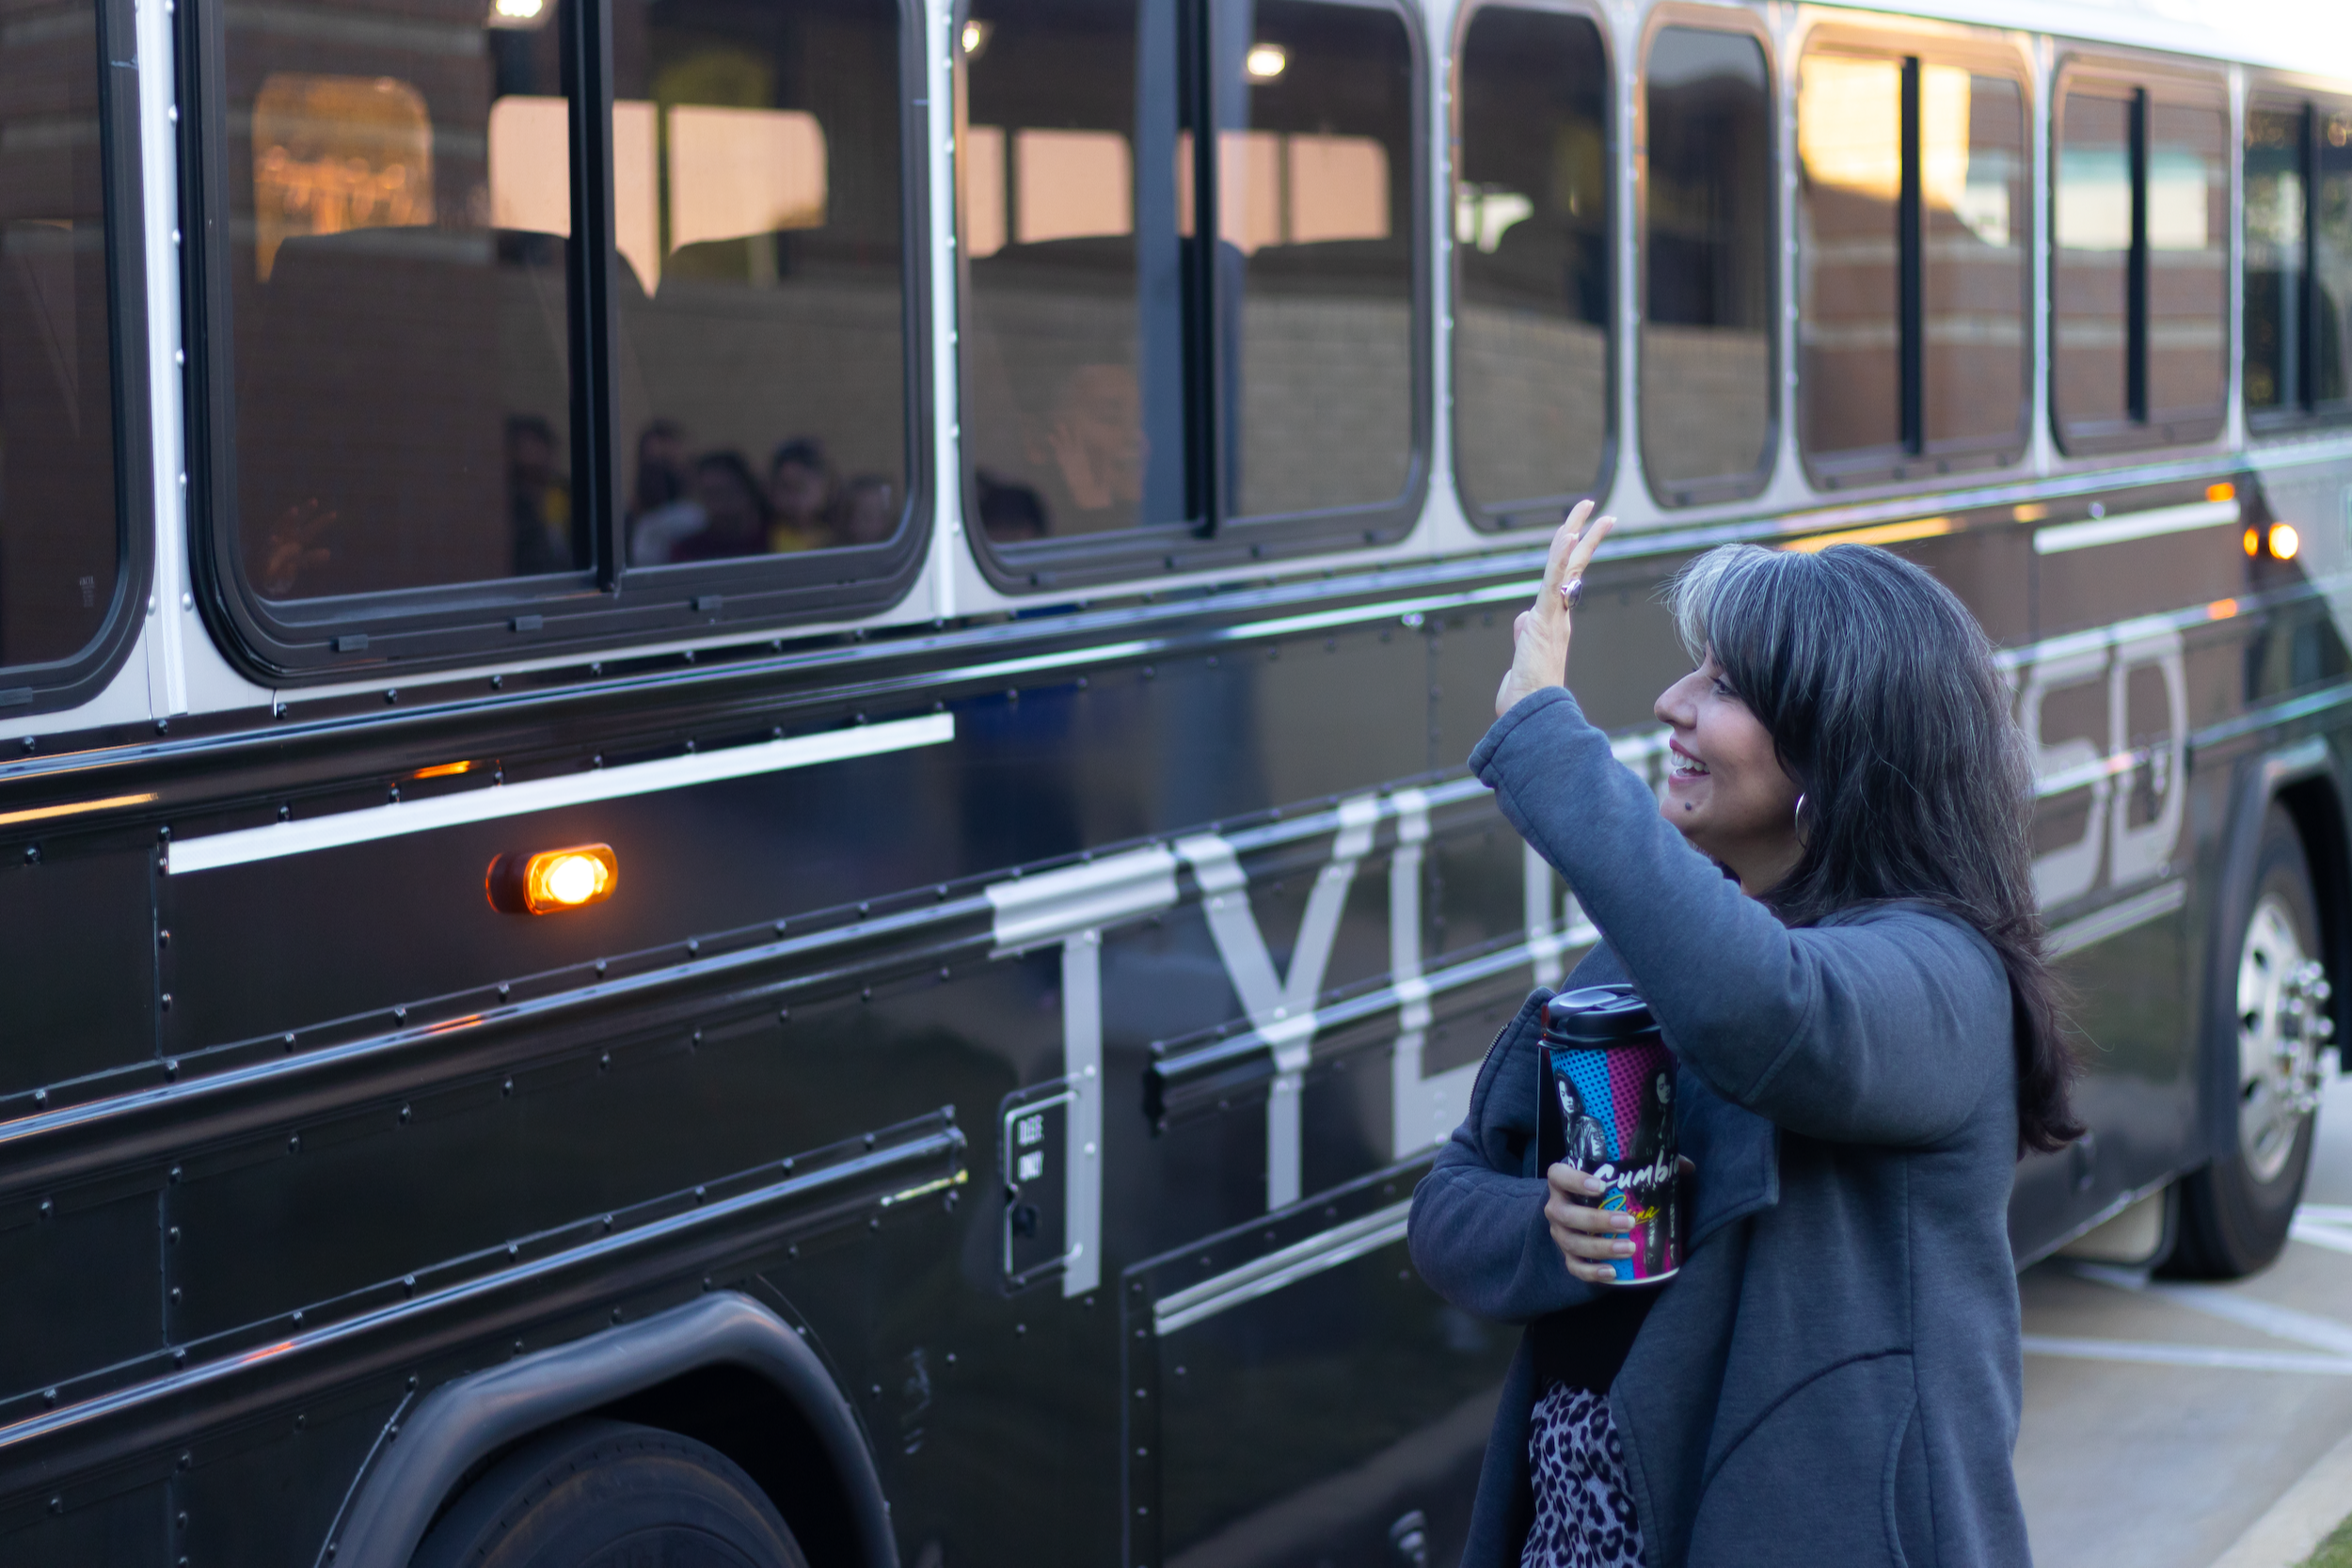 principal waving at students as they are leaving on school bus